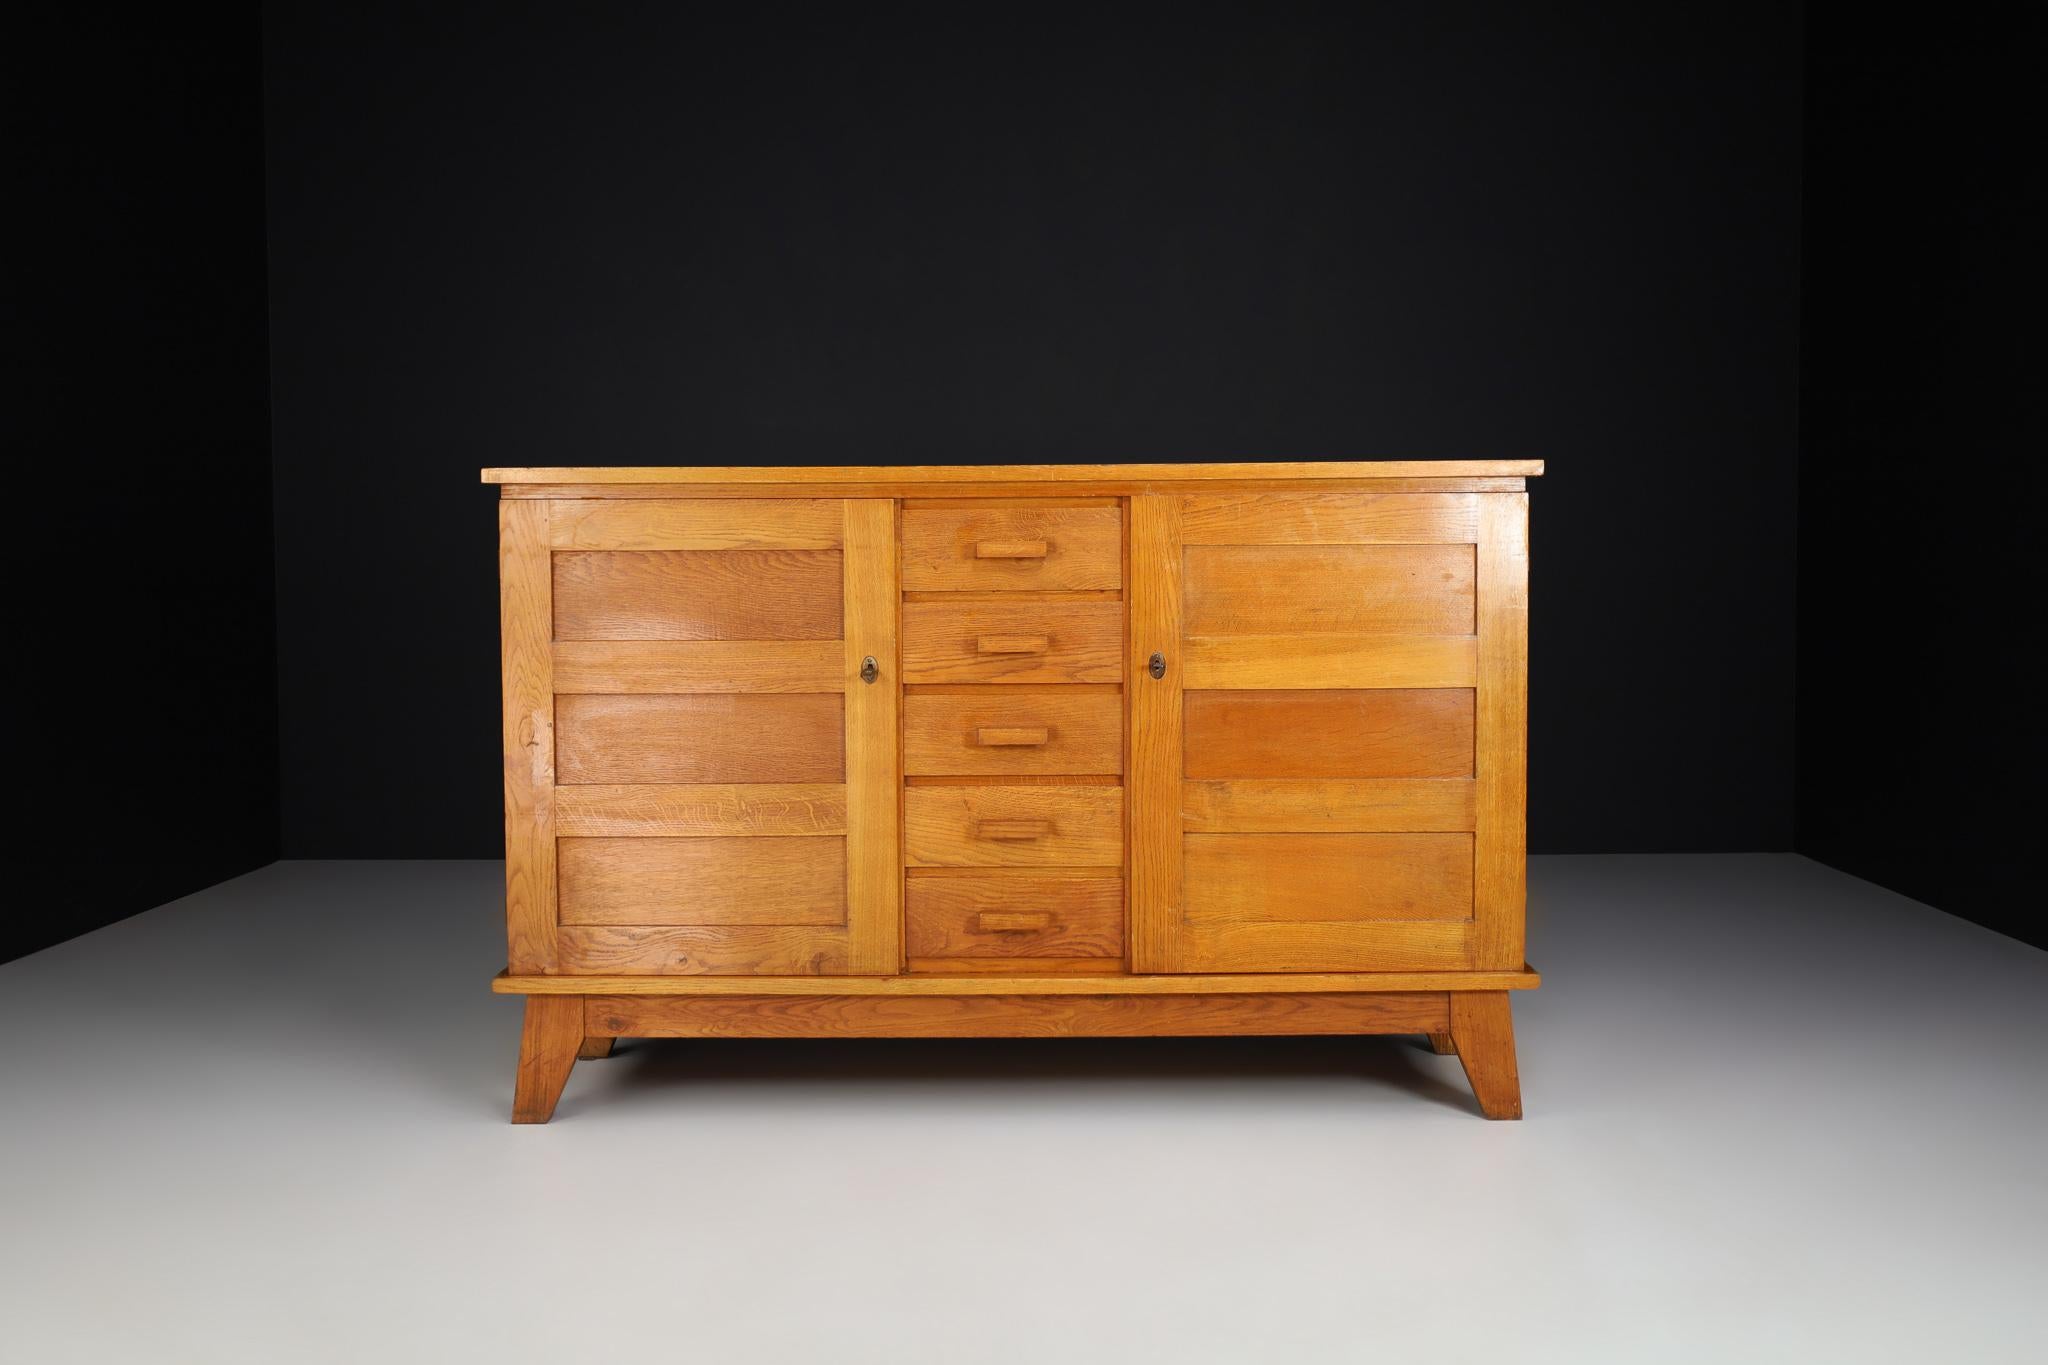 Midcentury sideboard in patinated Blonde French oak by René Gabriel, France, 1940s

Published in 1944 and designed by René Gabriel, this sideboard dates back to the 1940s and is a typical example of so-called reconstruction furniture. The design